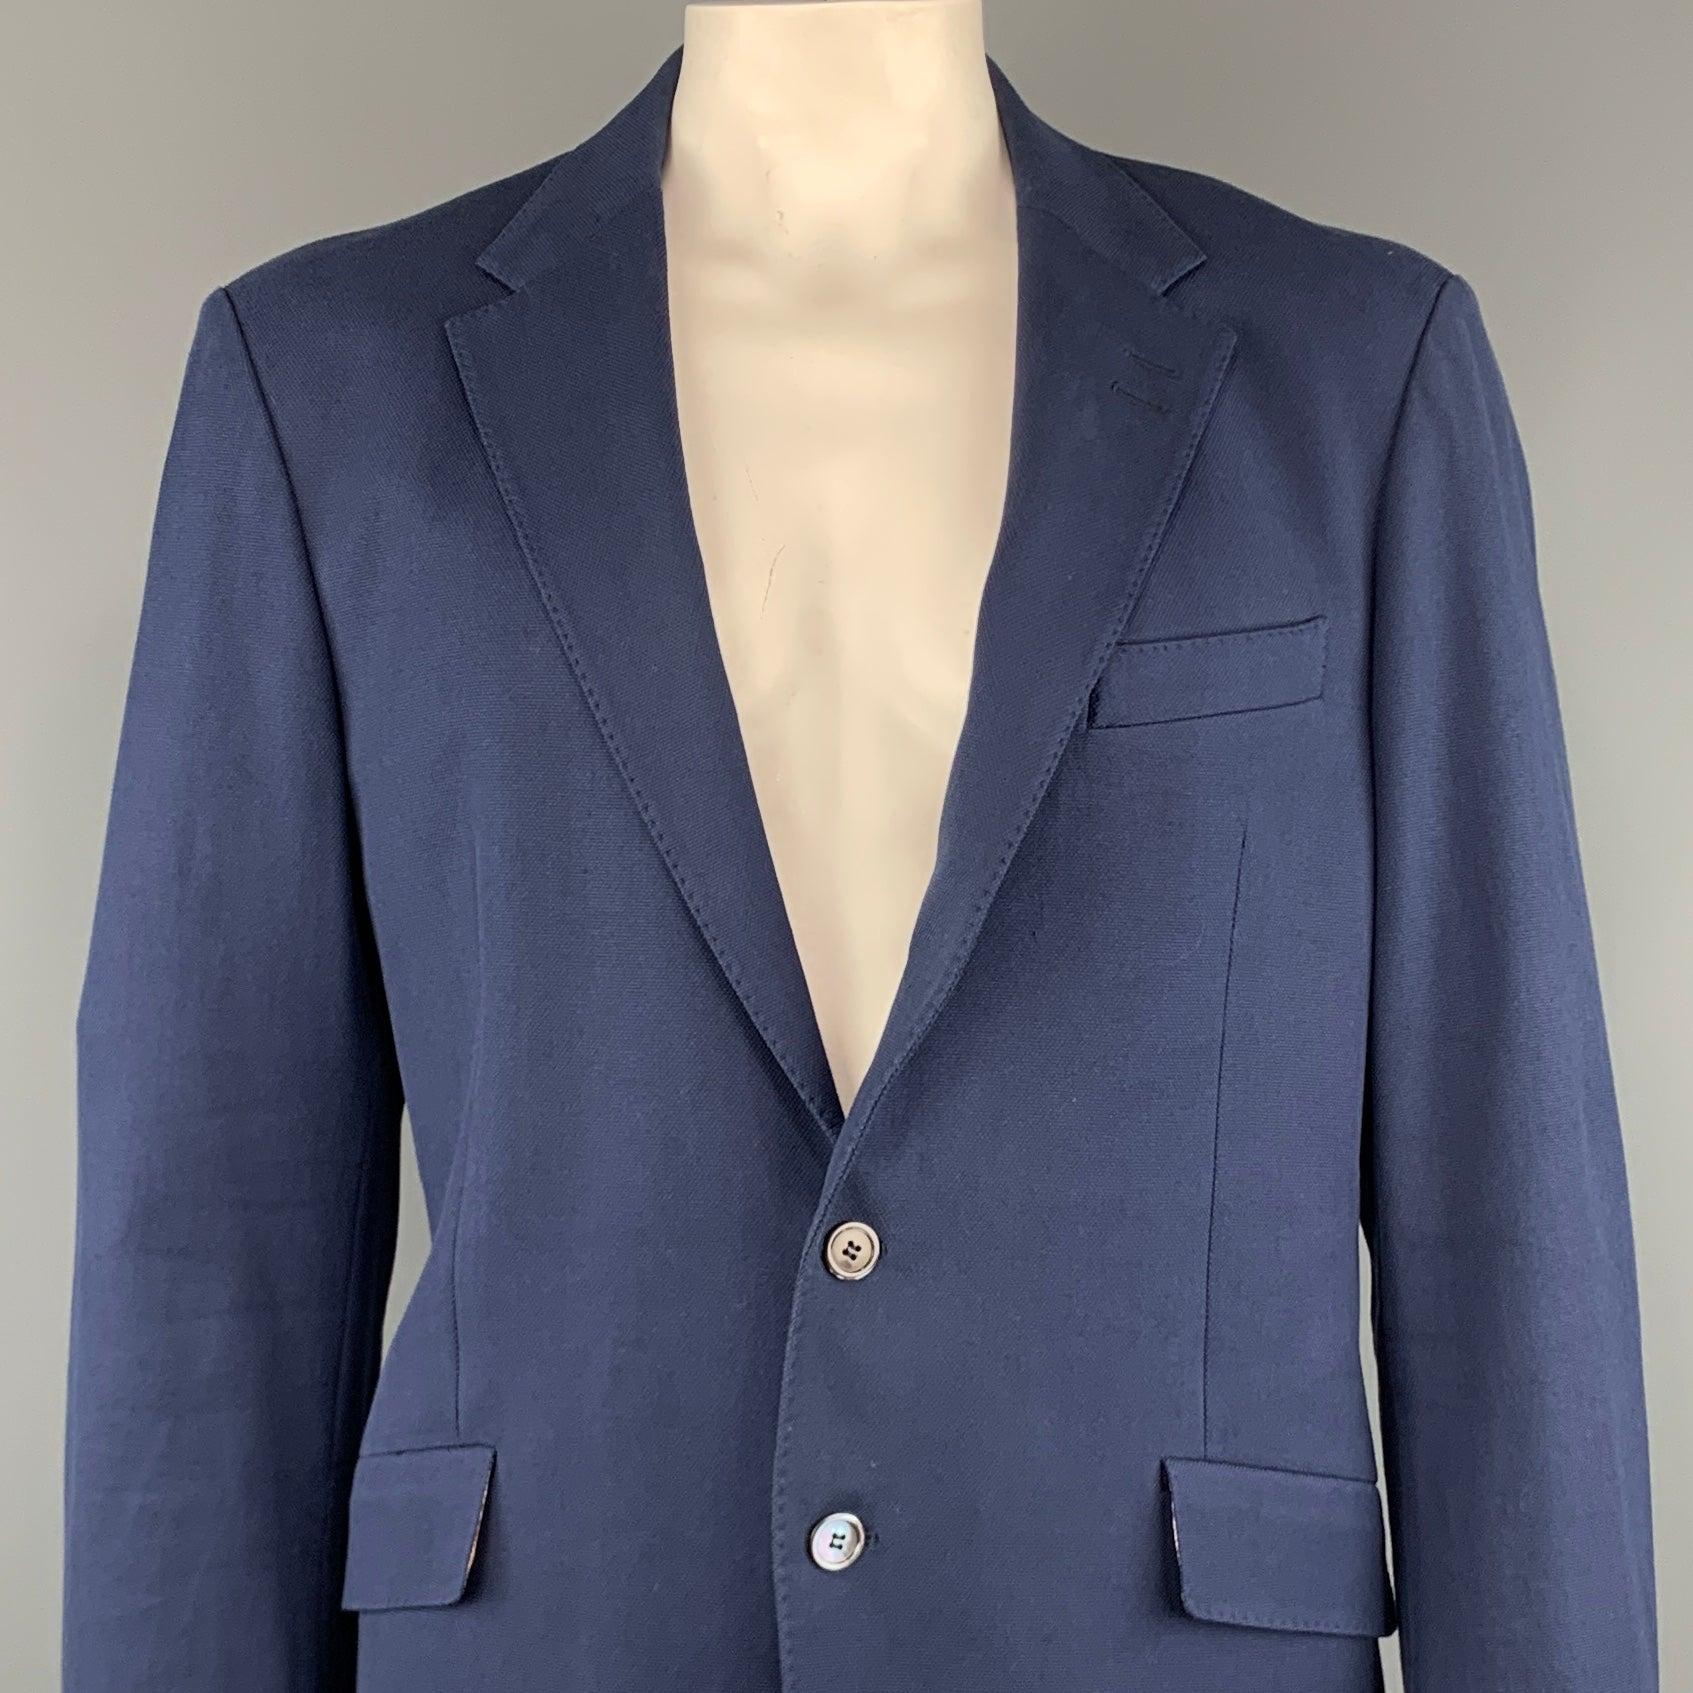 PAUL SMITH sport coat comes in a navy woven cotton with a notch lapel, stitching details, flap pockets, and a two button closure. Made in Italy.
Excellent
Pre-Owned Condition.  

Marked:   54 

Measurements: 
 
Shoulder: 19 inches 
Chest: 42 inches